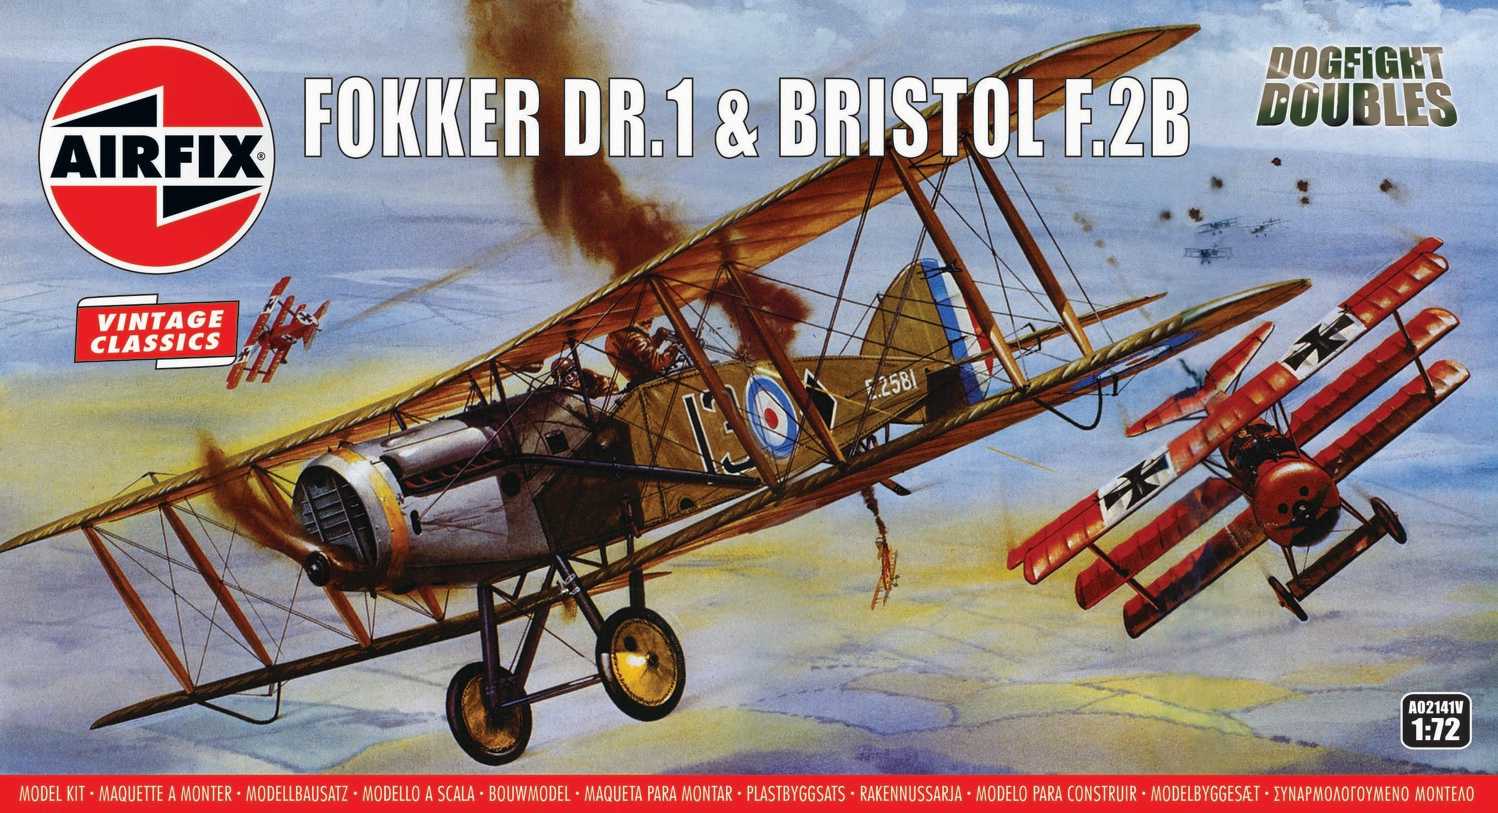 Fokker DR1 Triplane & Bristol Fighter Dogfight Double (Airfix 1:72)